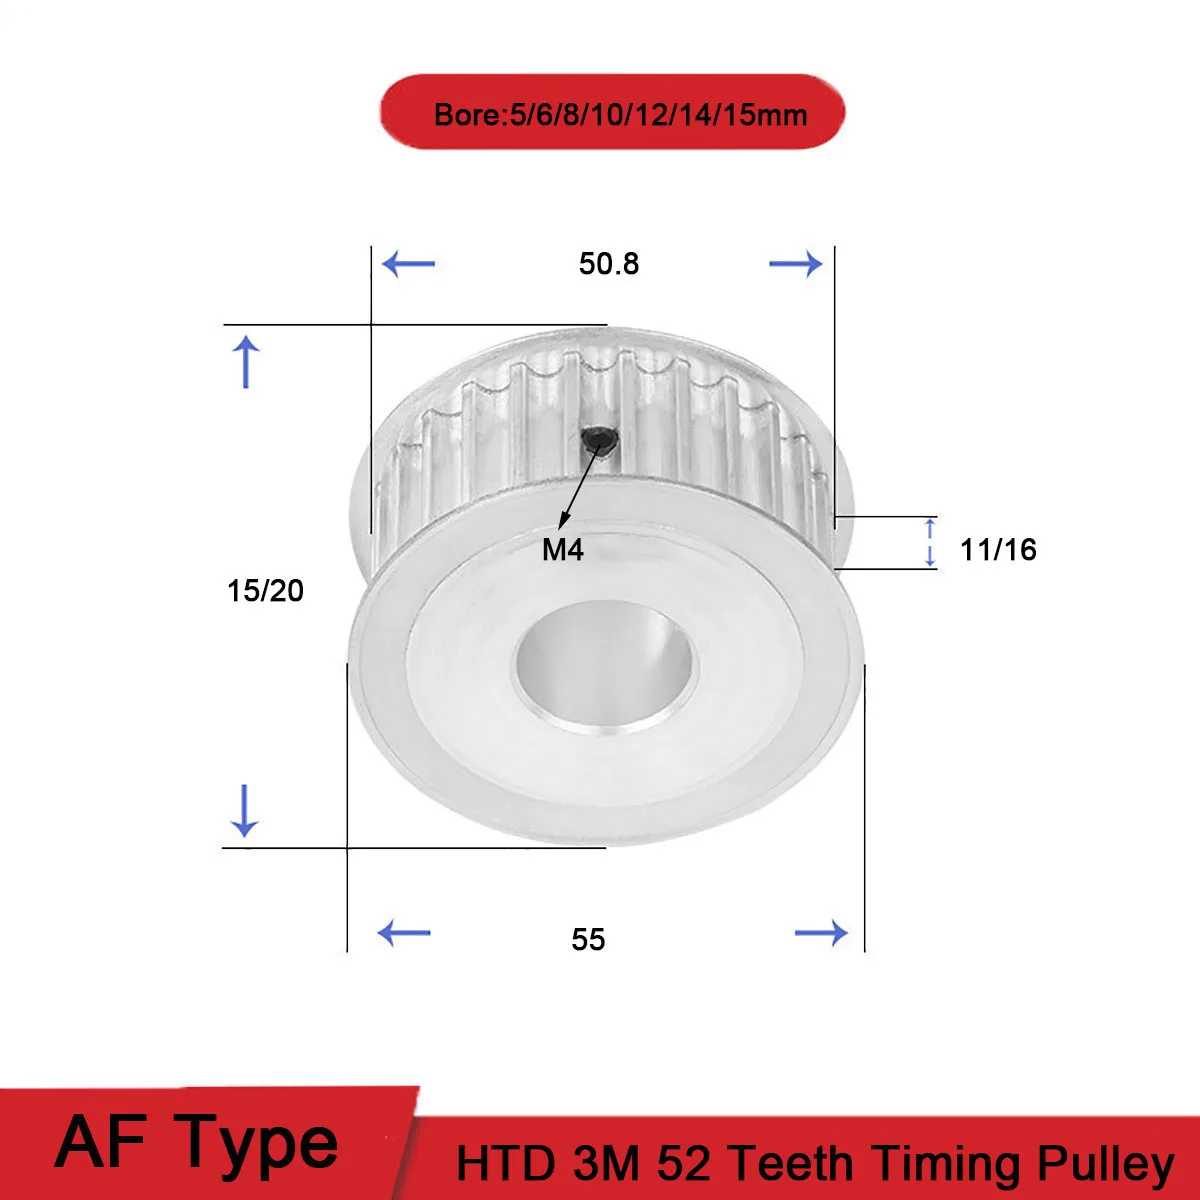 

HTD 3M 52 Teeth Timing Pulley Bore 5~15mm Gear Pulley 3mm Pitch Teeth Width 11mm 16mm Aluminum Synchronous Timing Belt Pulley